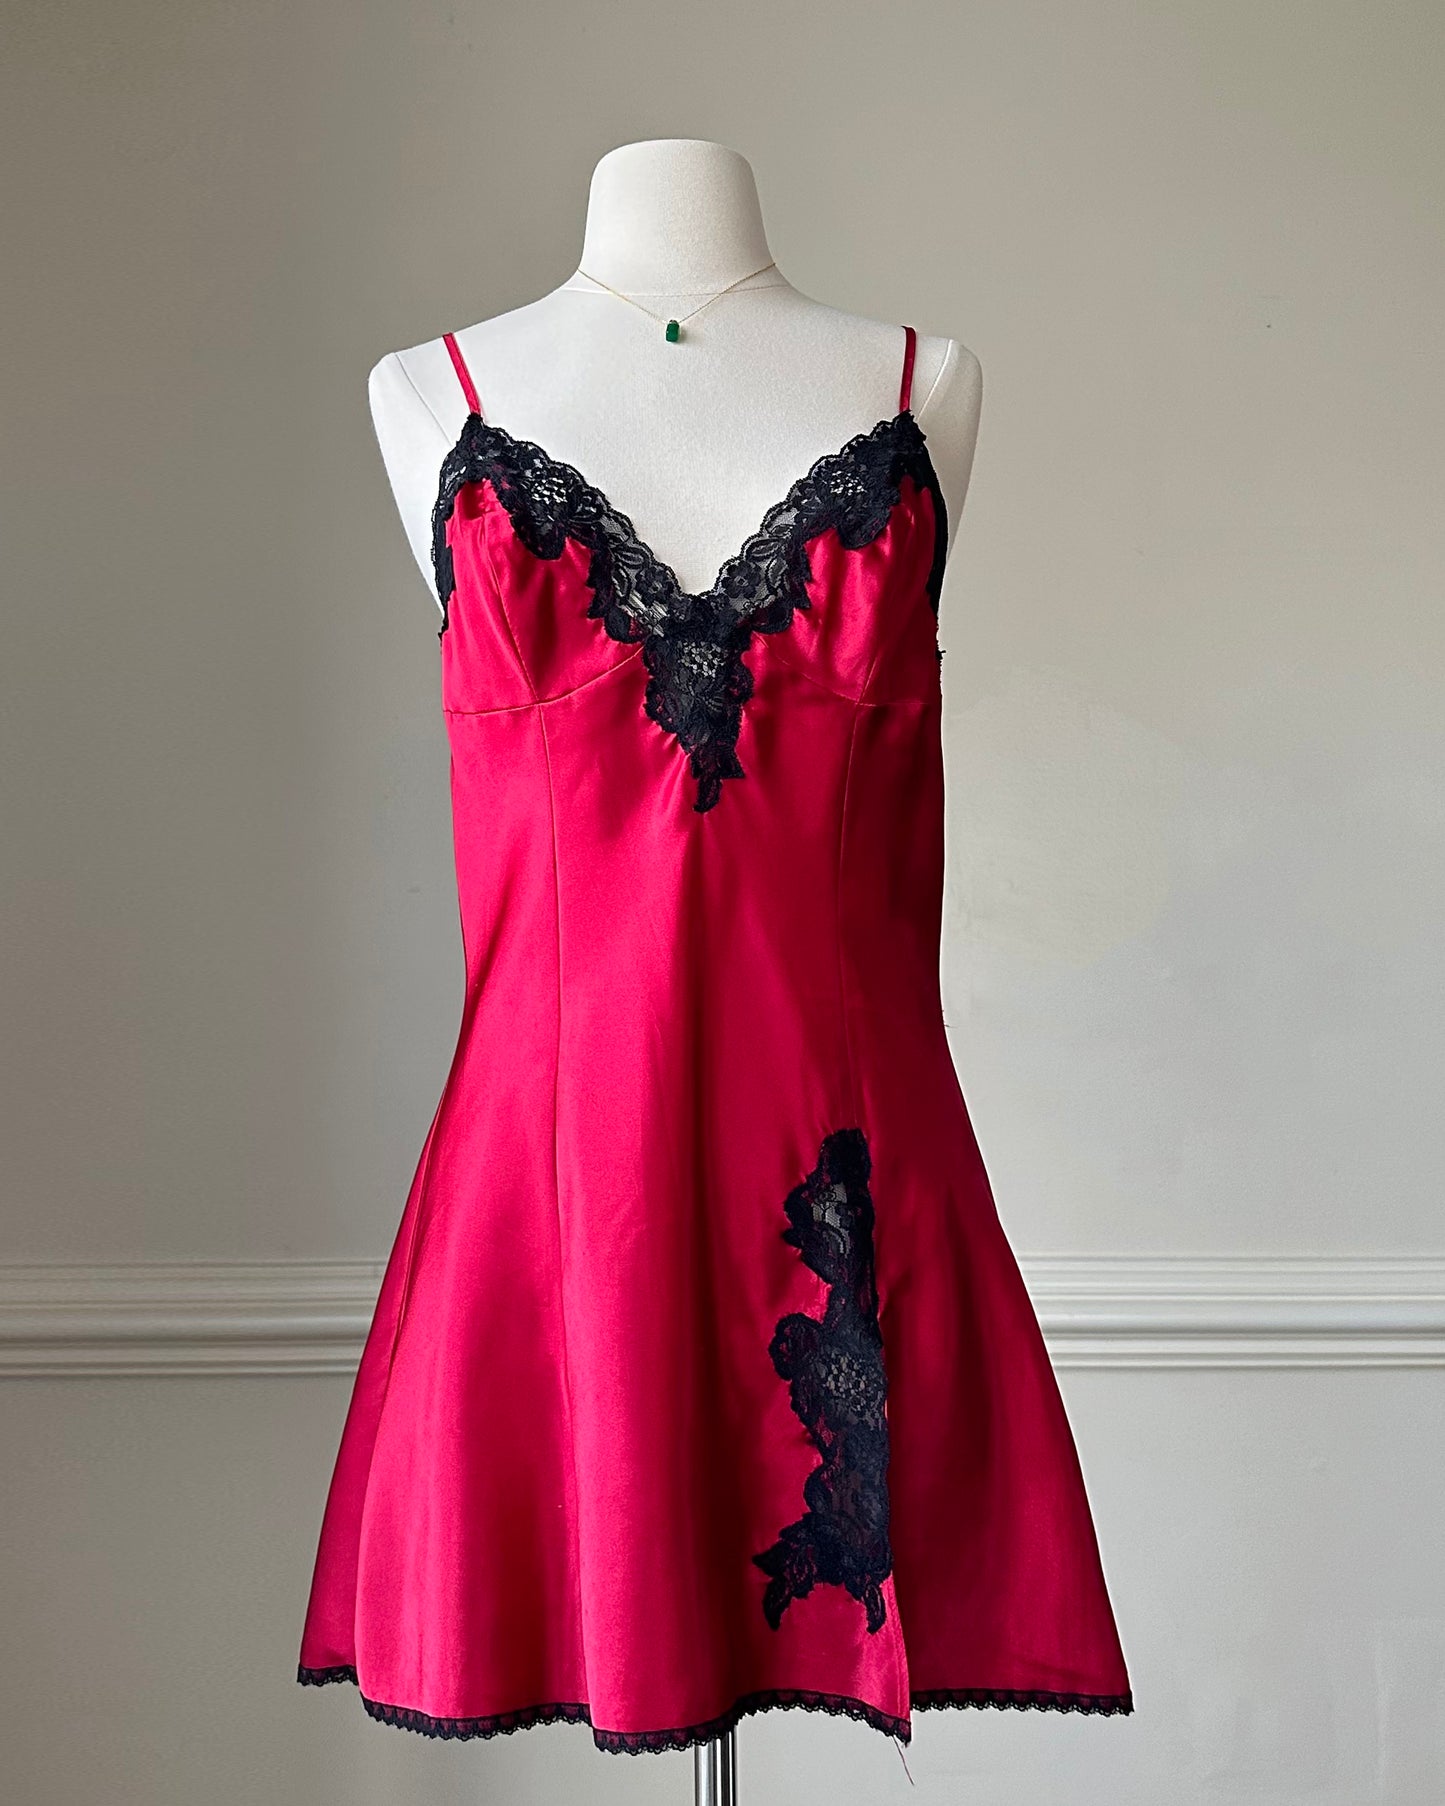 Sexy Red Slip Dress featuring Rosette Lace Embroidery on Bustier